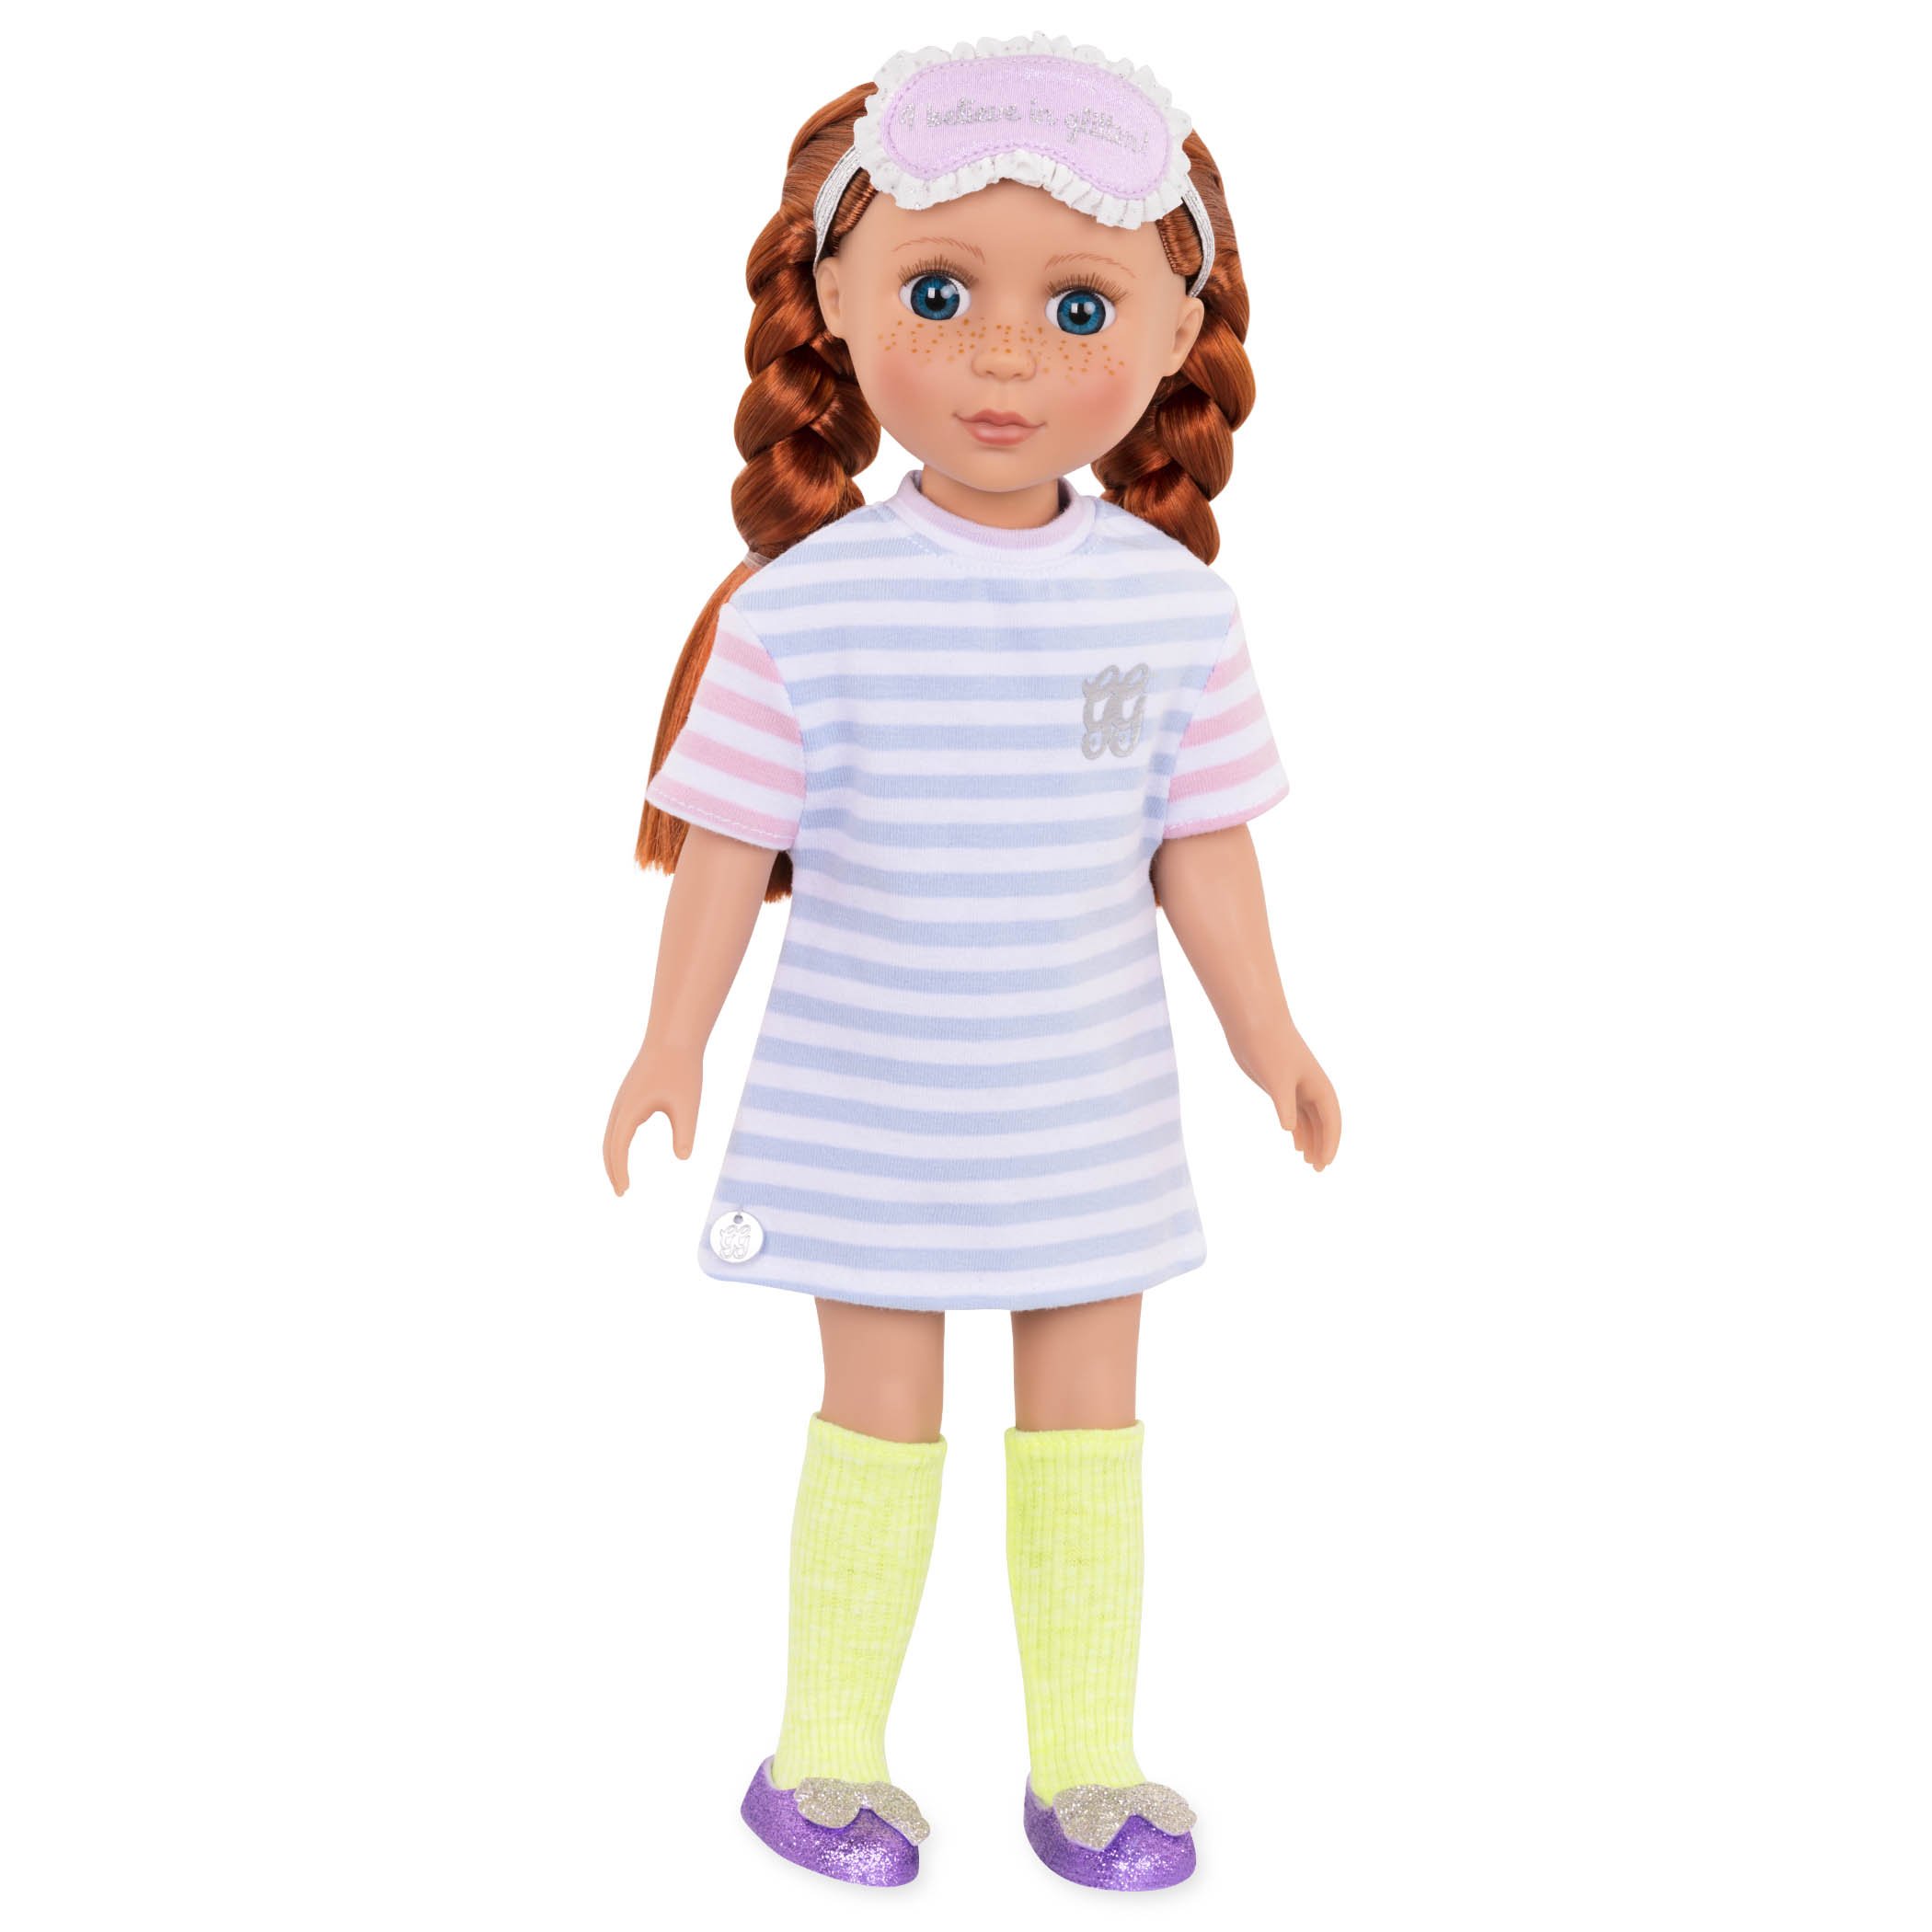 Glitter Girls by Battat - Sprinkles of Dreamy Glitter Outfit -14-inch Doll Clothes– Toys, Clothes and Accessories For Girls 3-Year-Old and Up